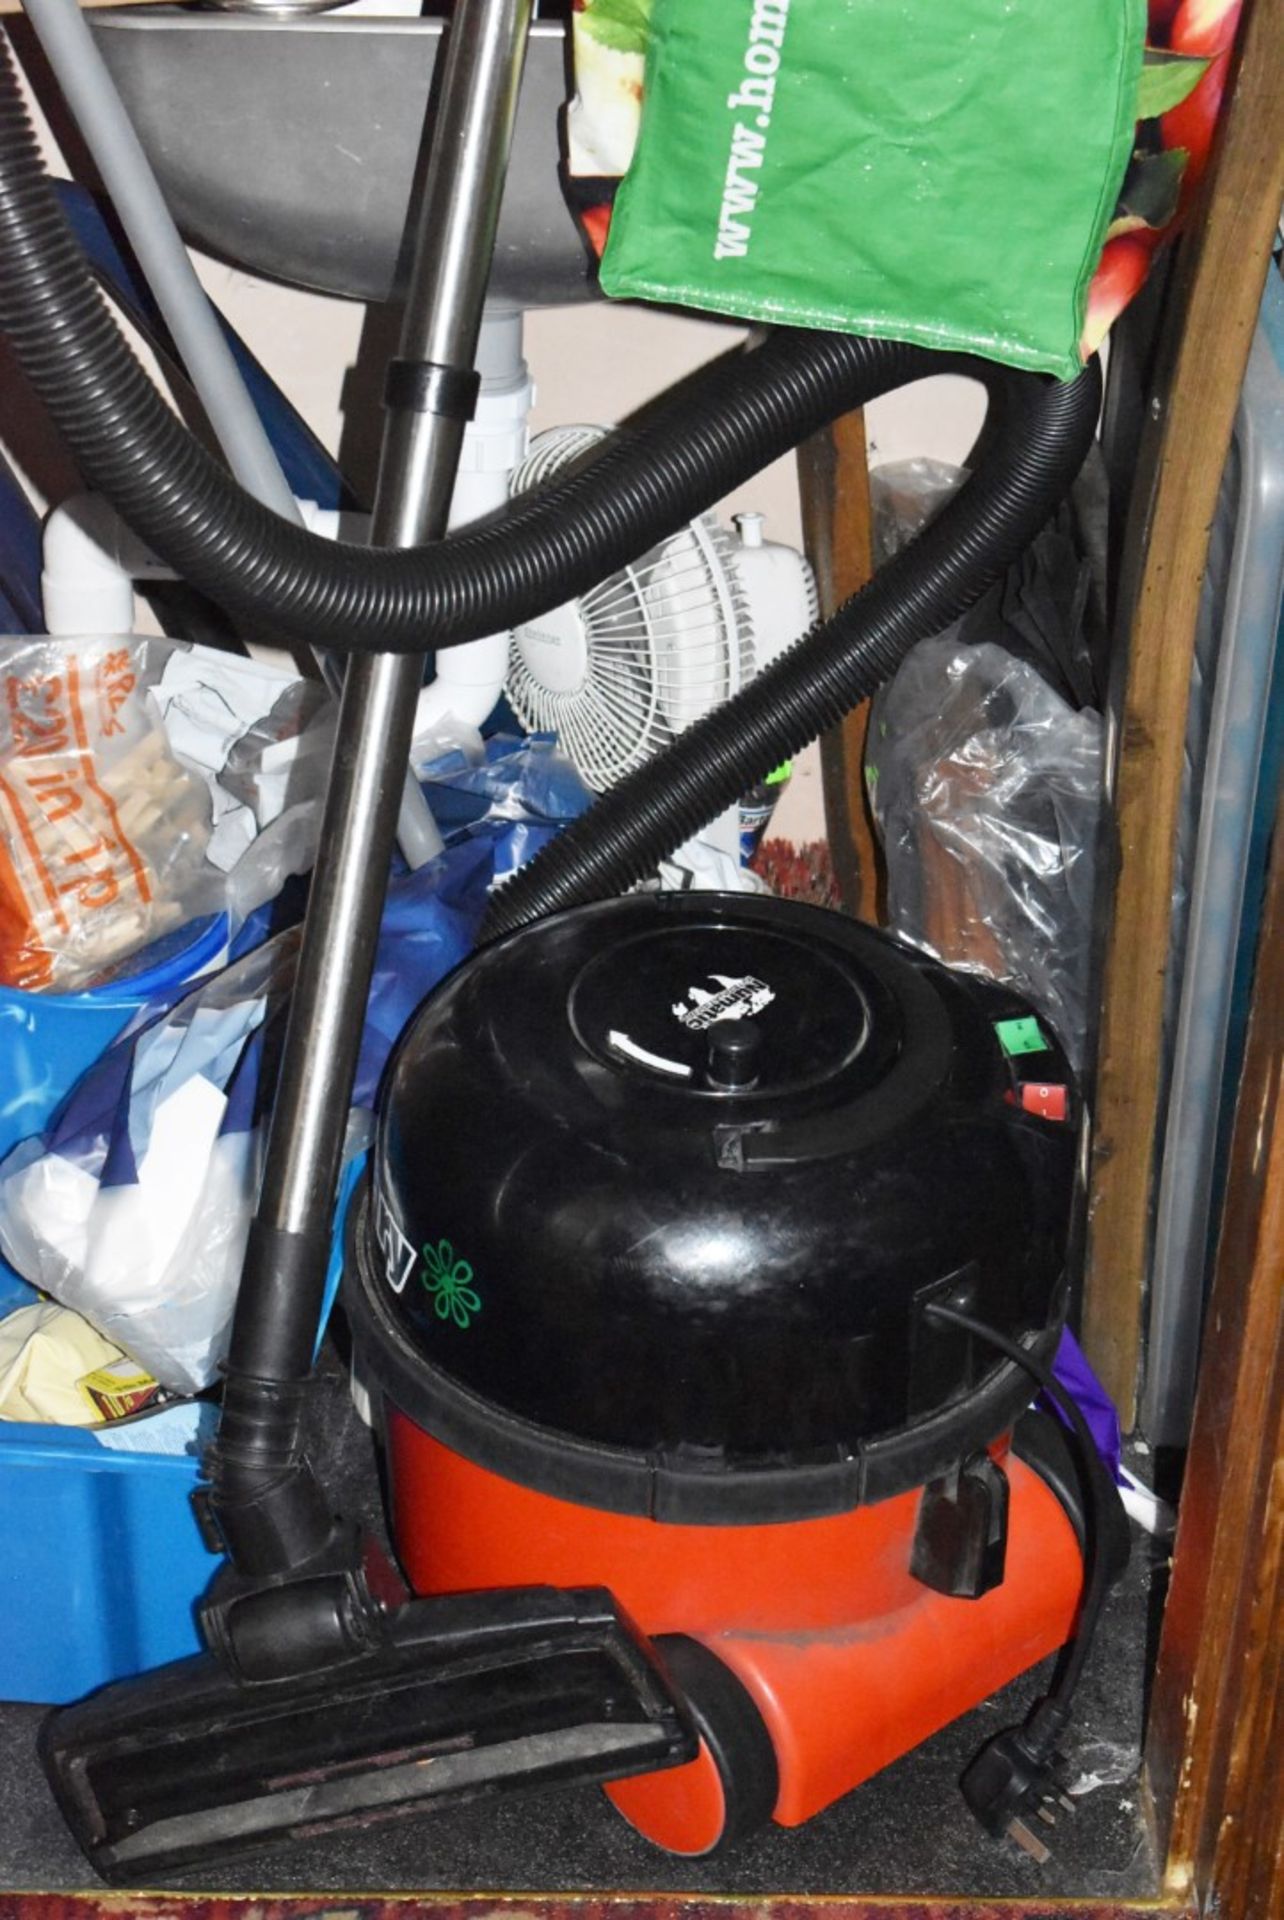 1 x Contents of Storage Room Including Numatic Henry Hoover, Fan, Duster, Mop Heads, Brush and